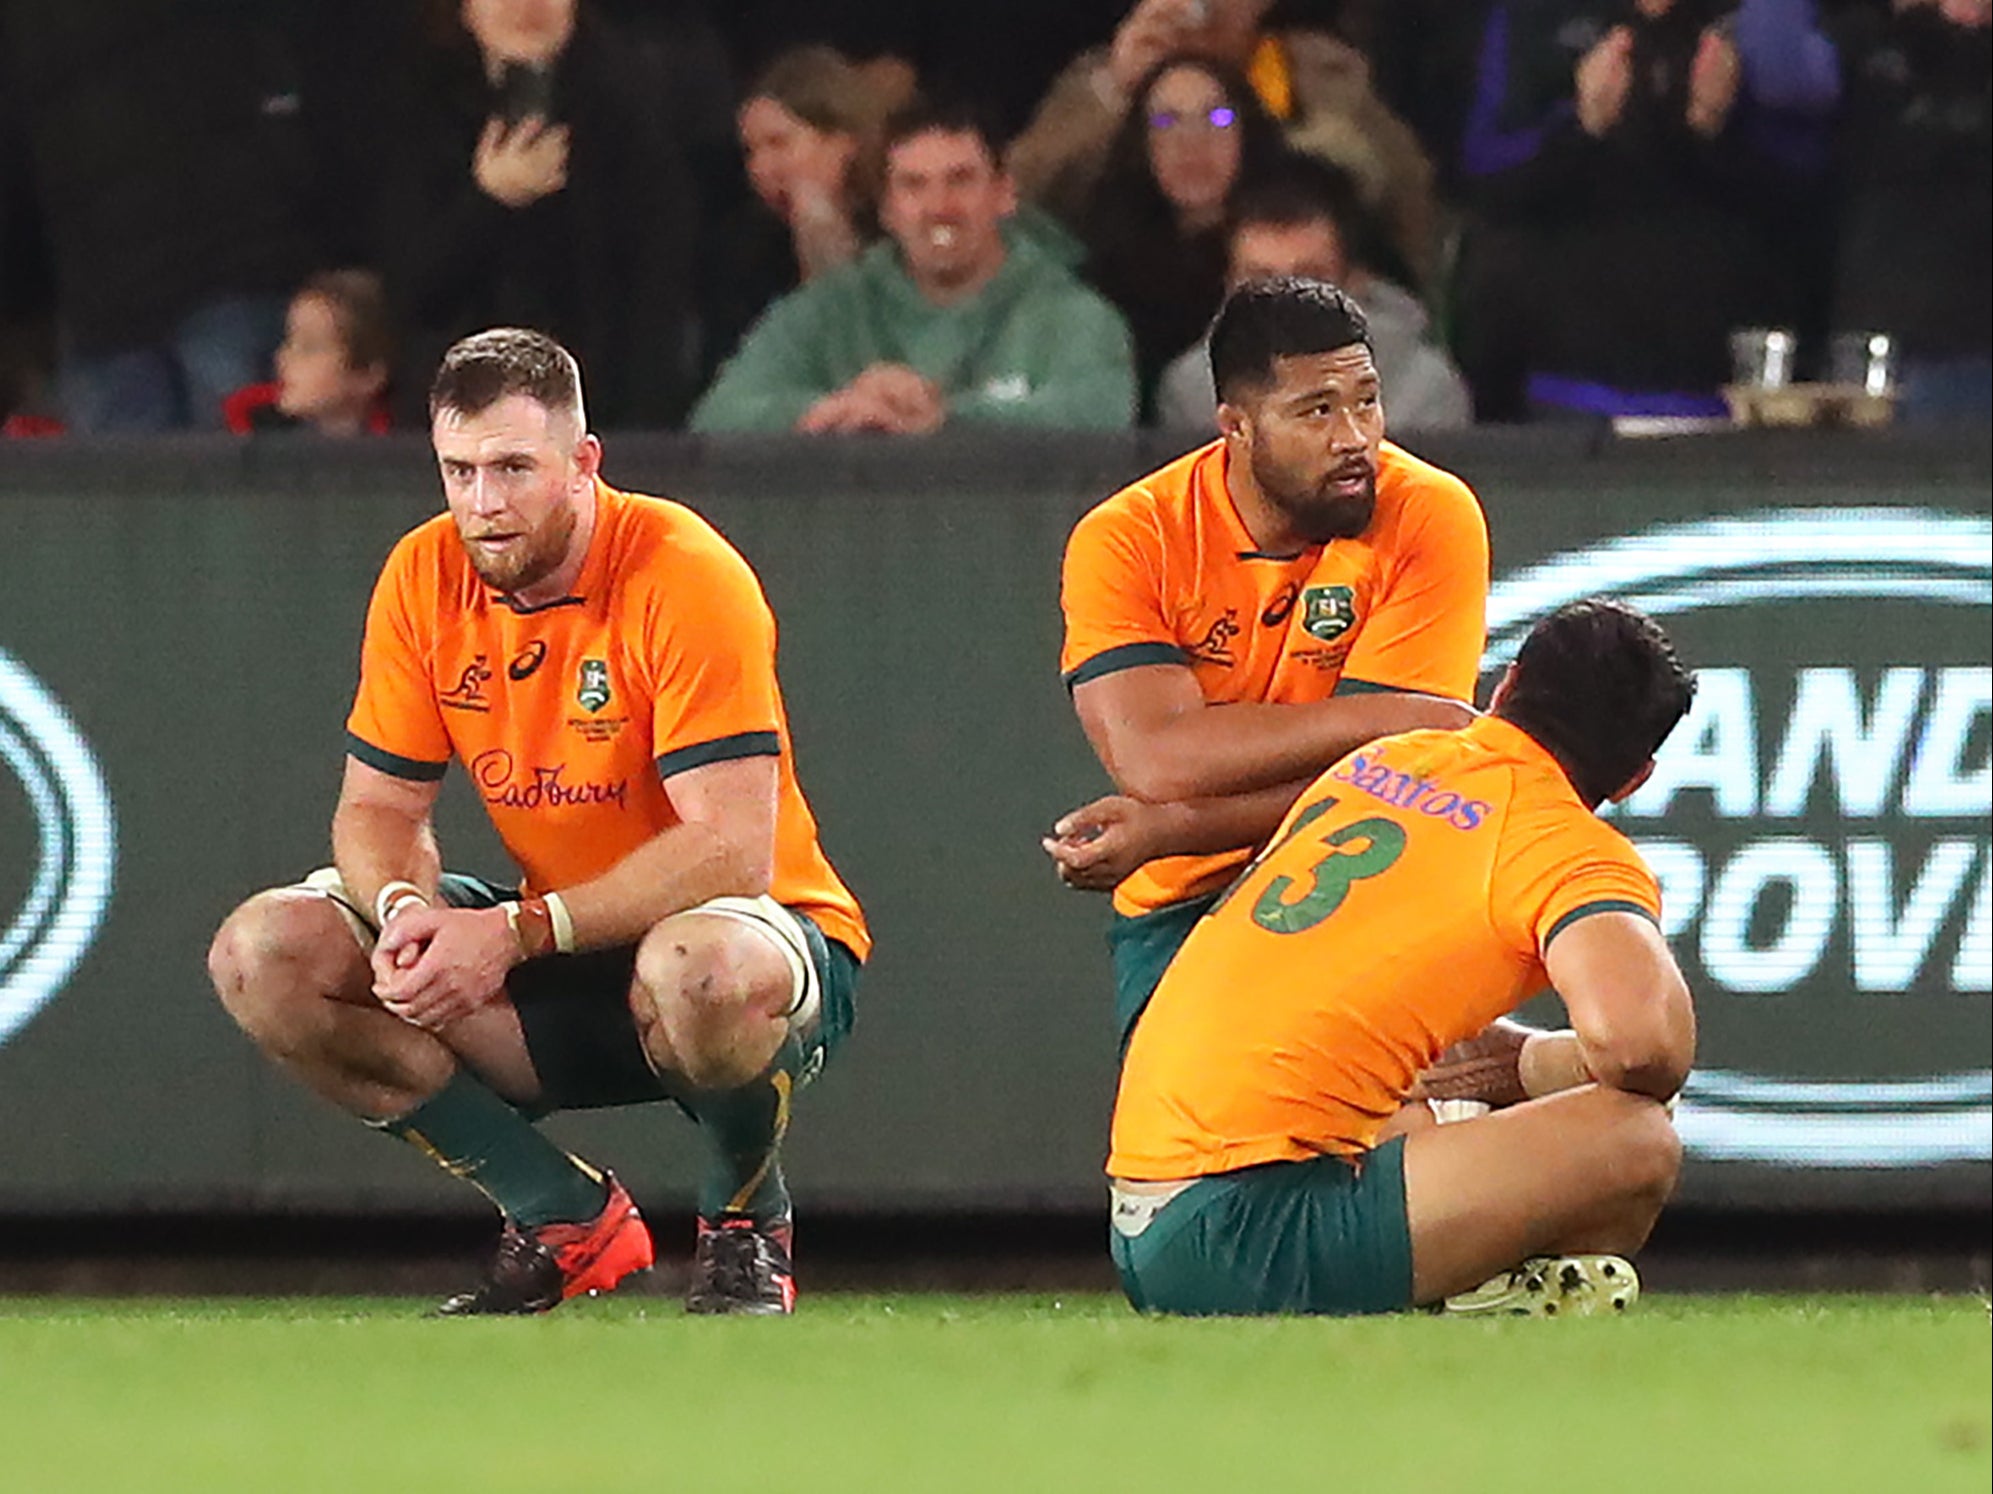 The Wallabies have won only three of their last 12 matches